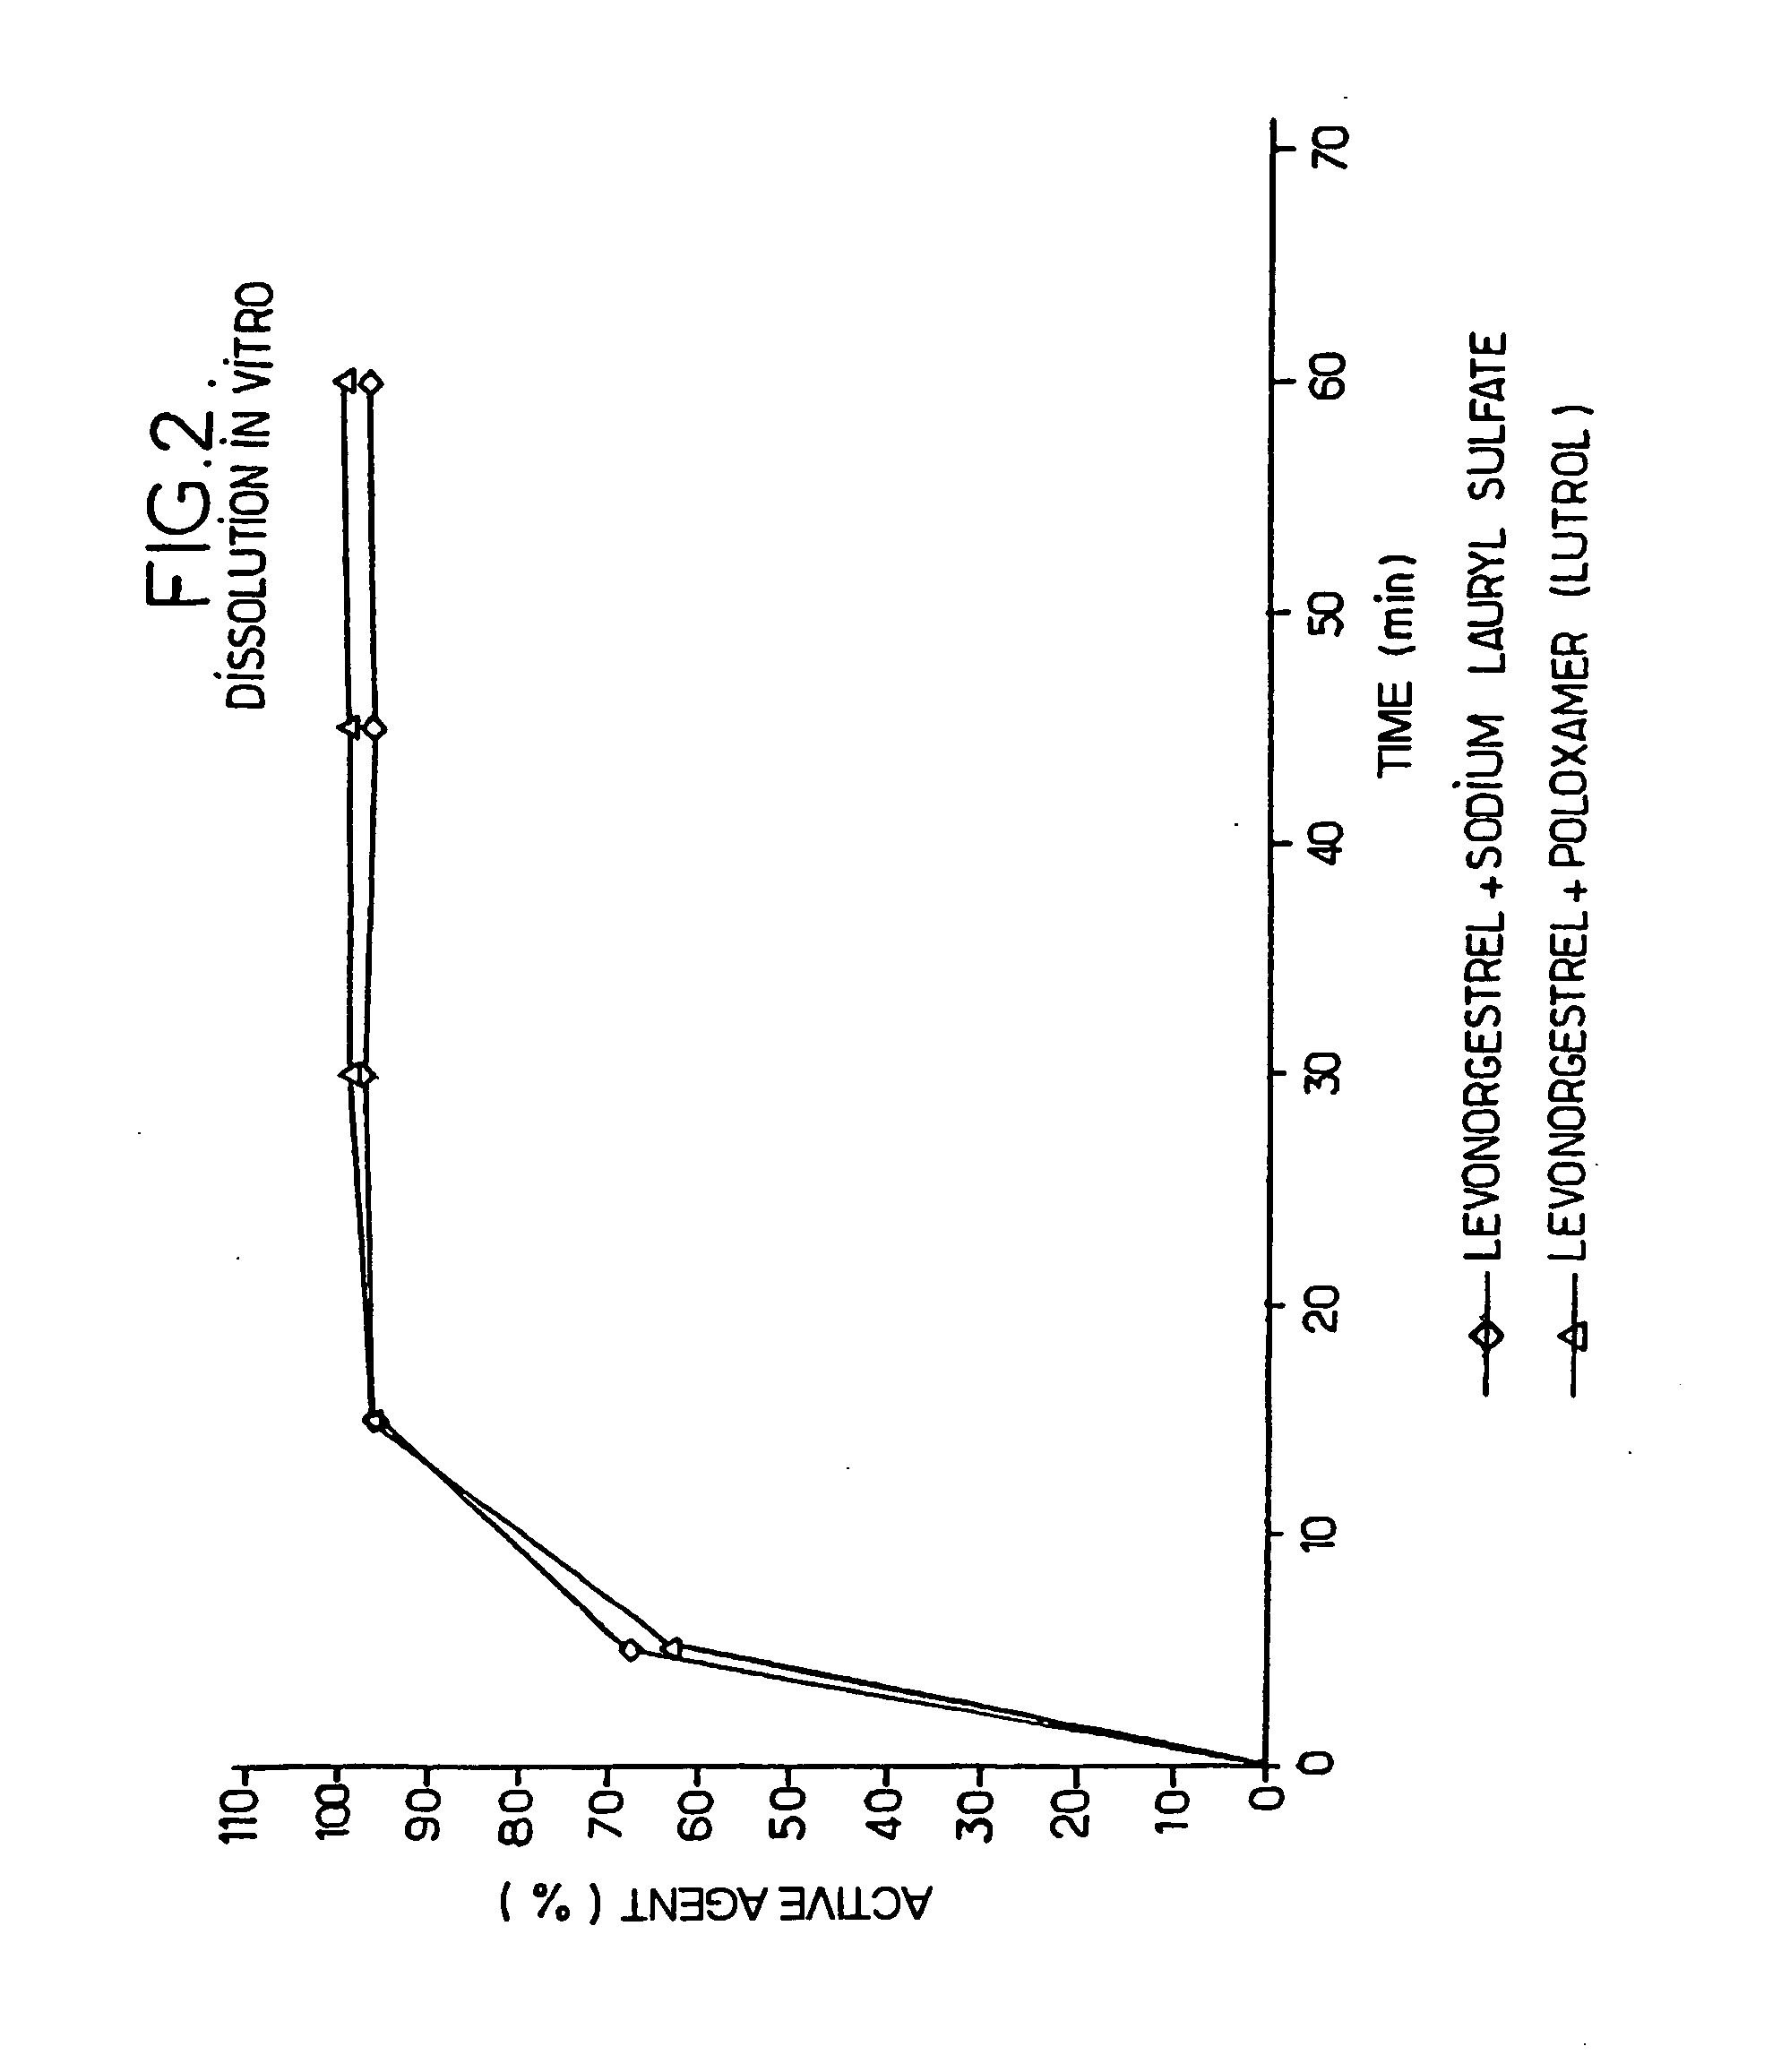 Progestin co-micronized with a surfactant, pharmaceutical composition comprising same, methods for making same and uses thereof